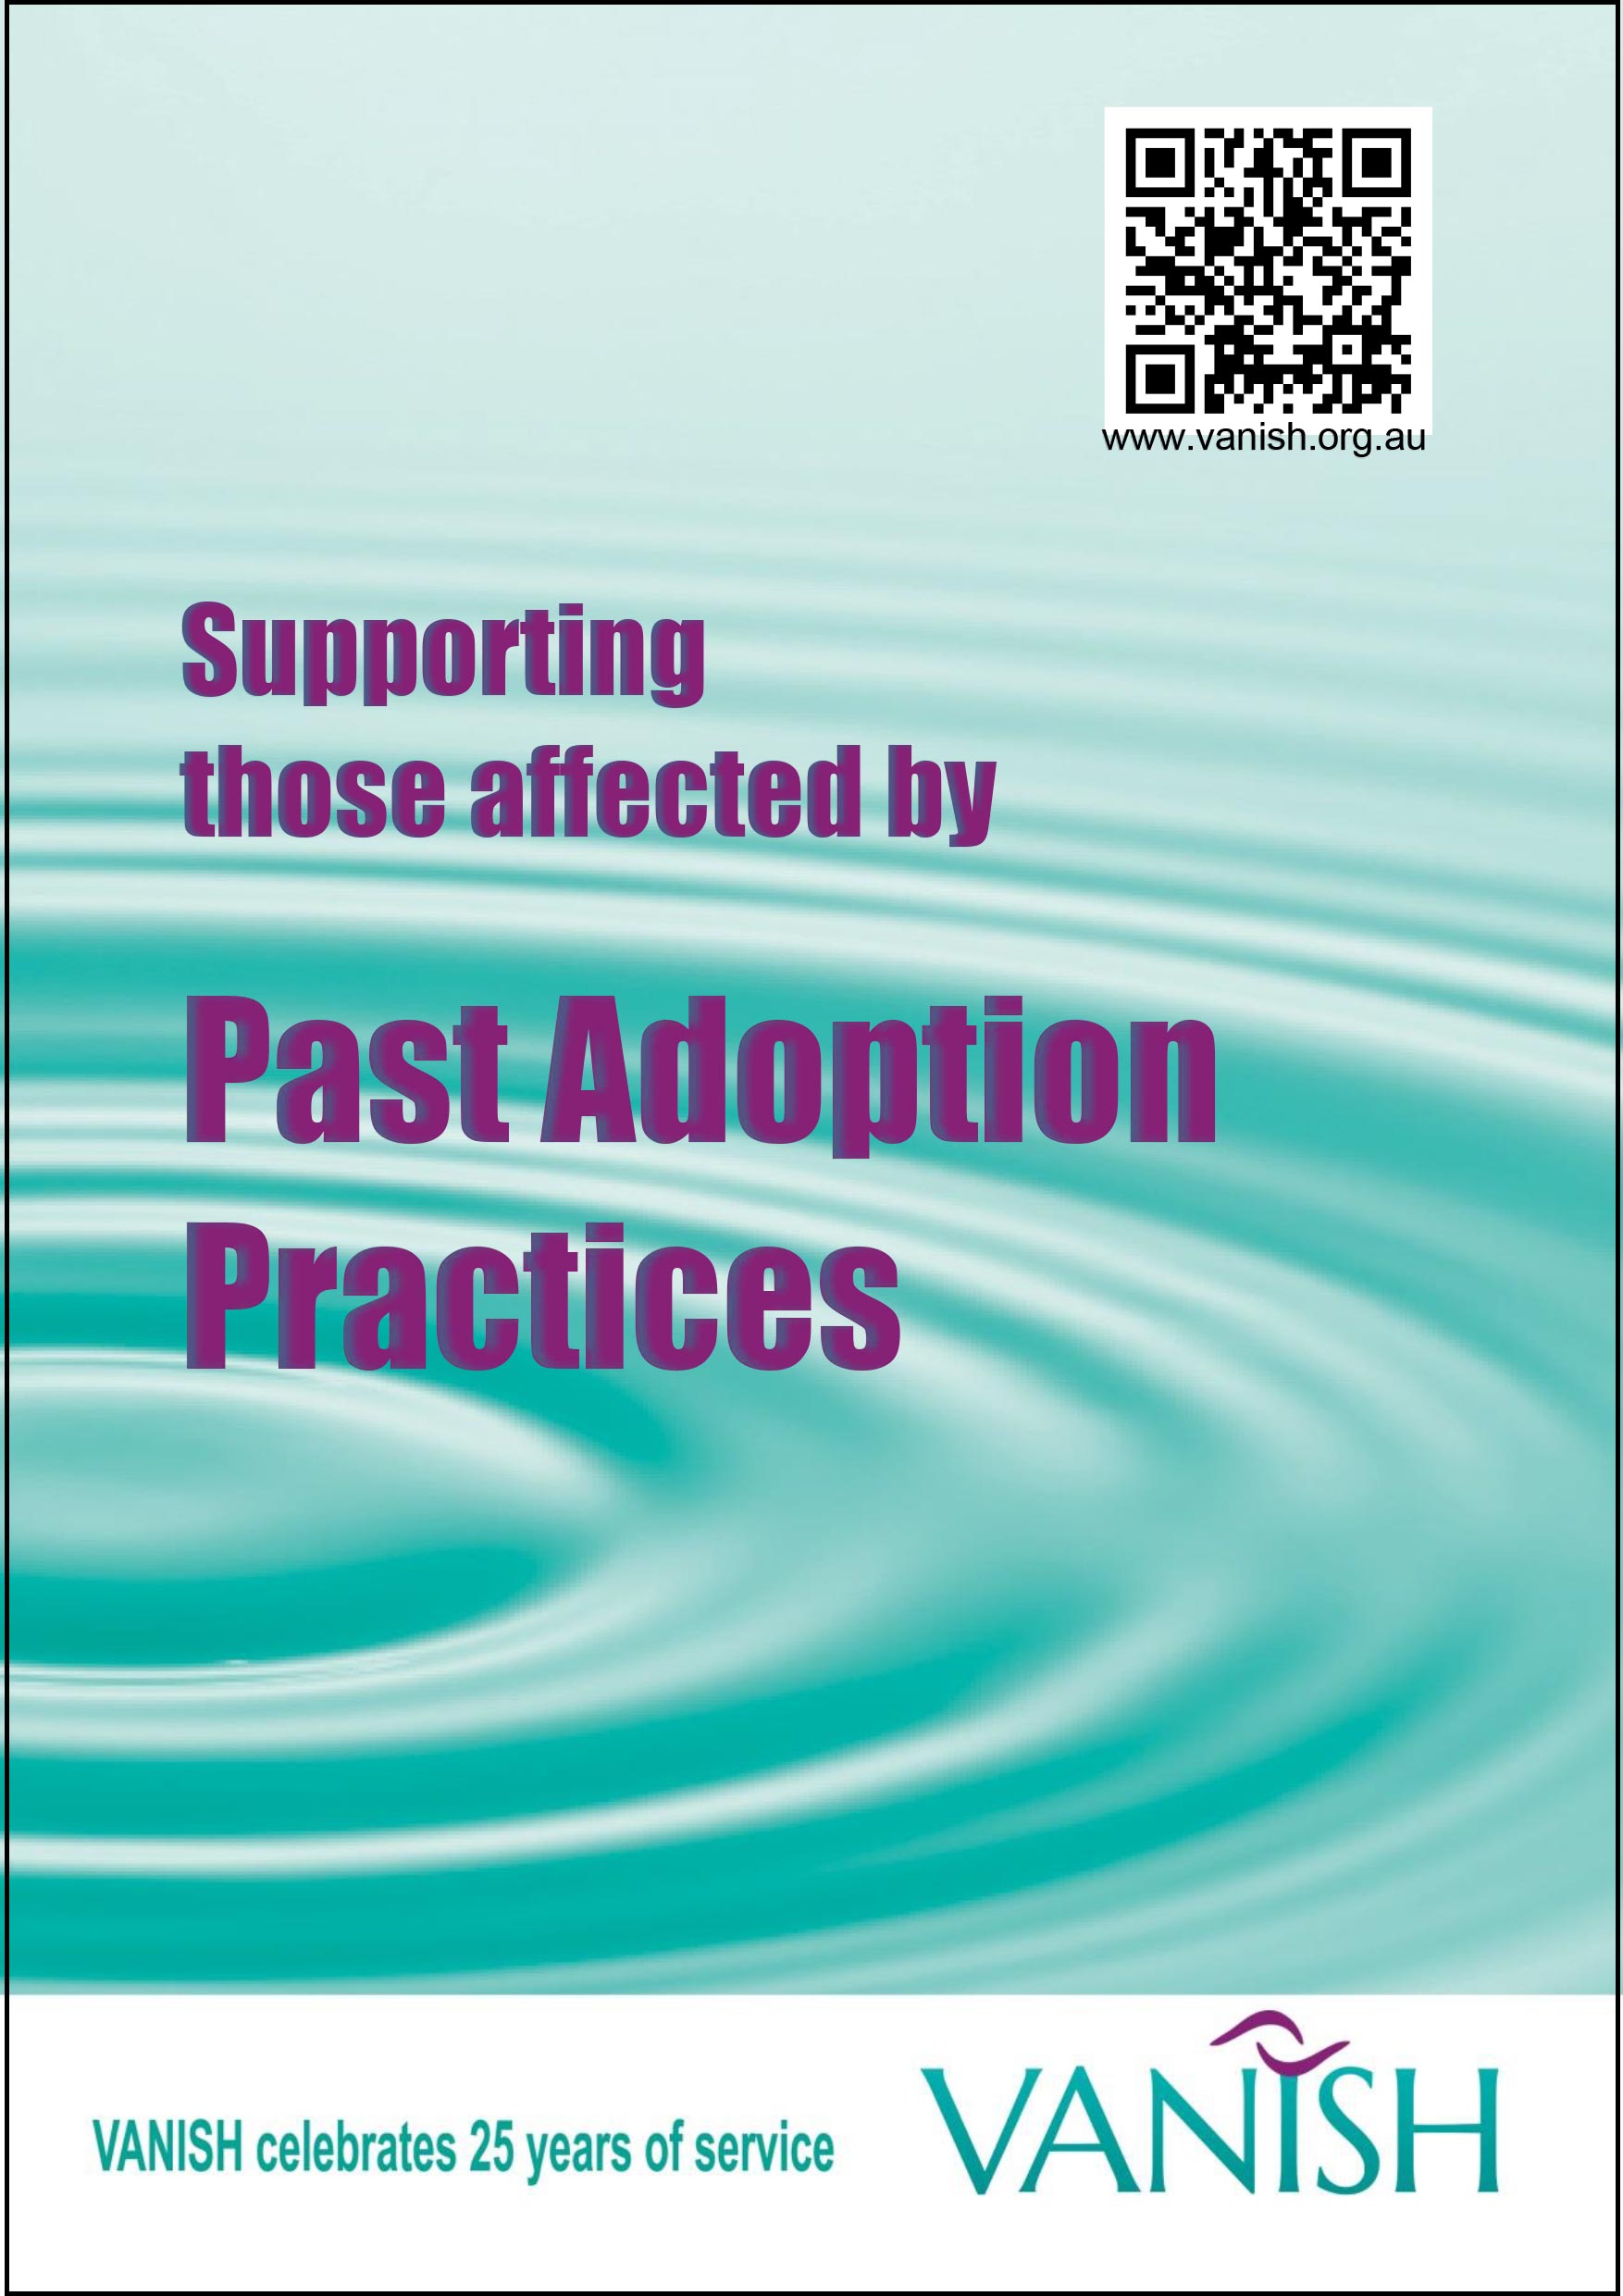 Supporting those affected by Past Adoption Practices